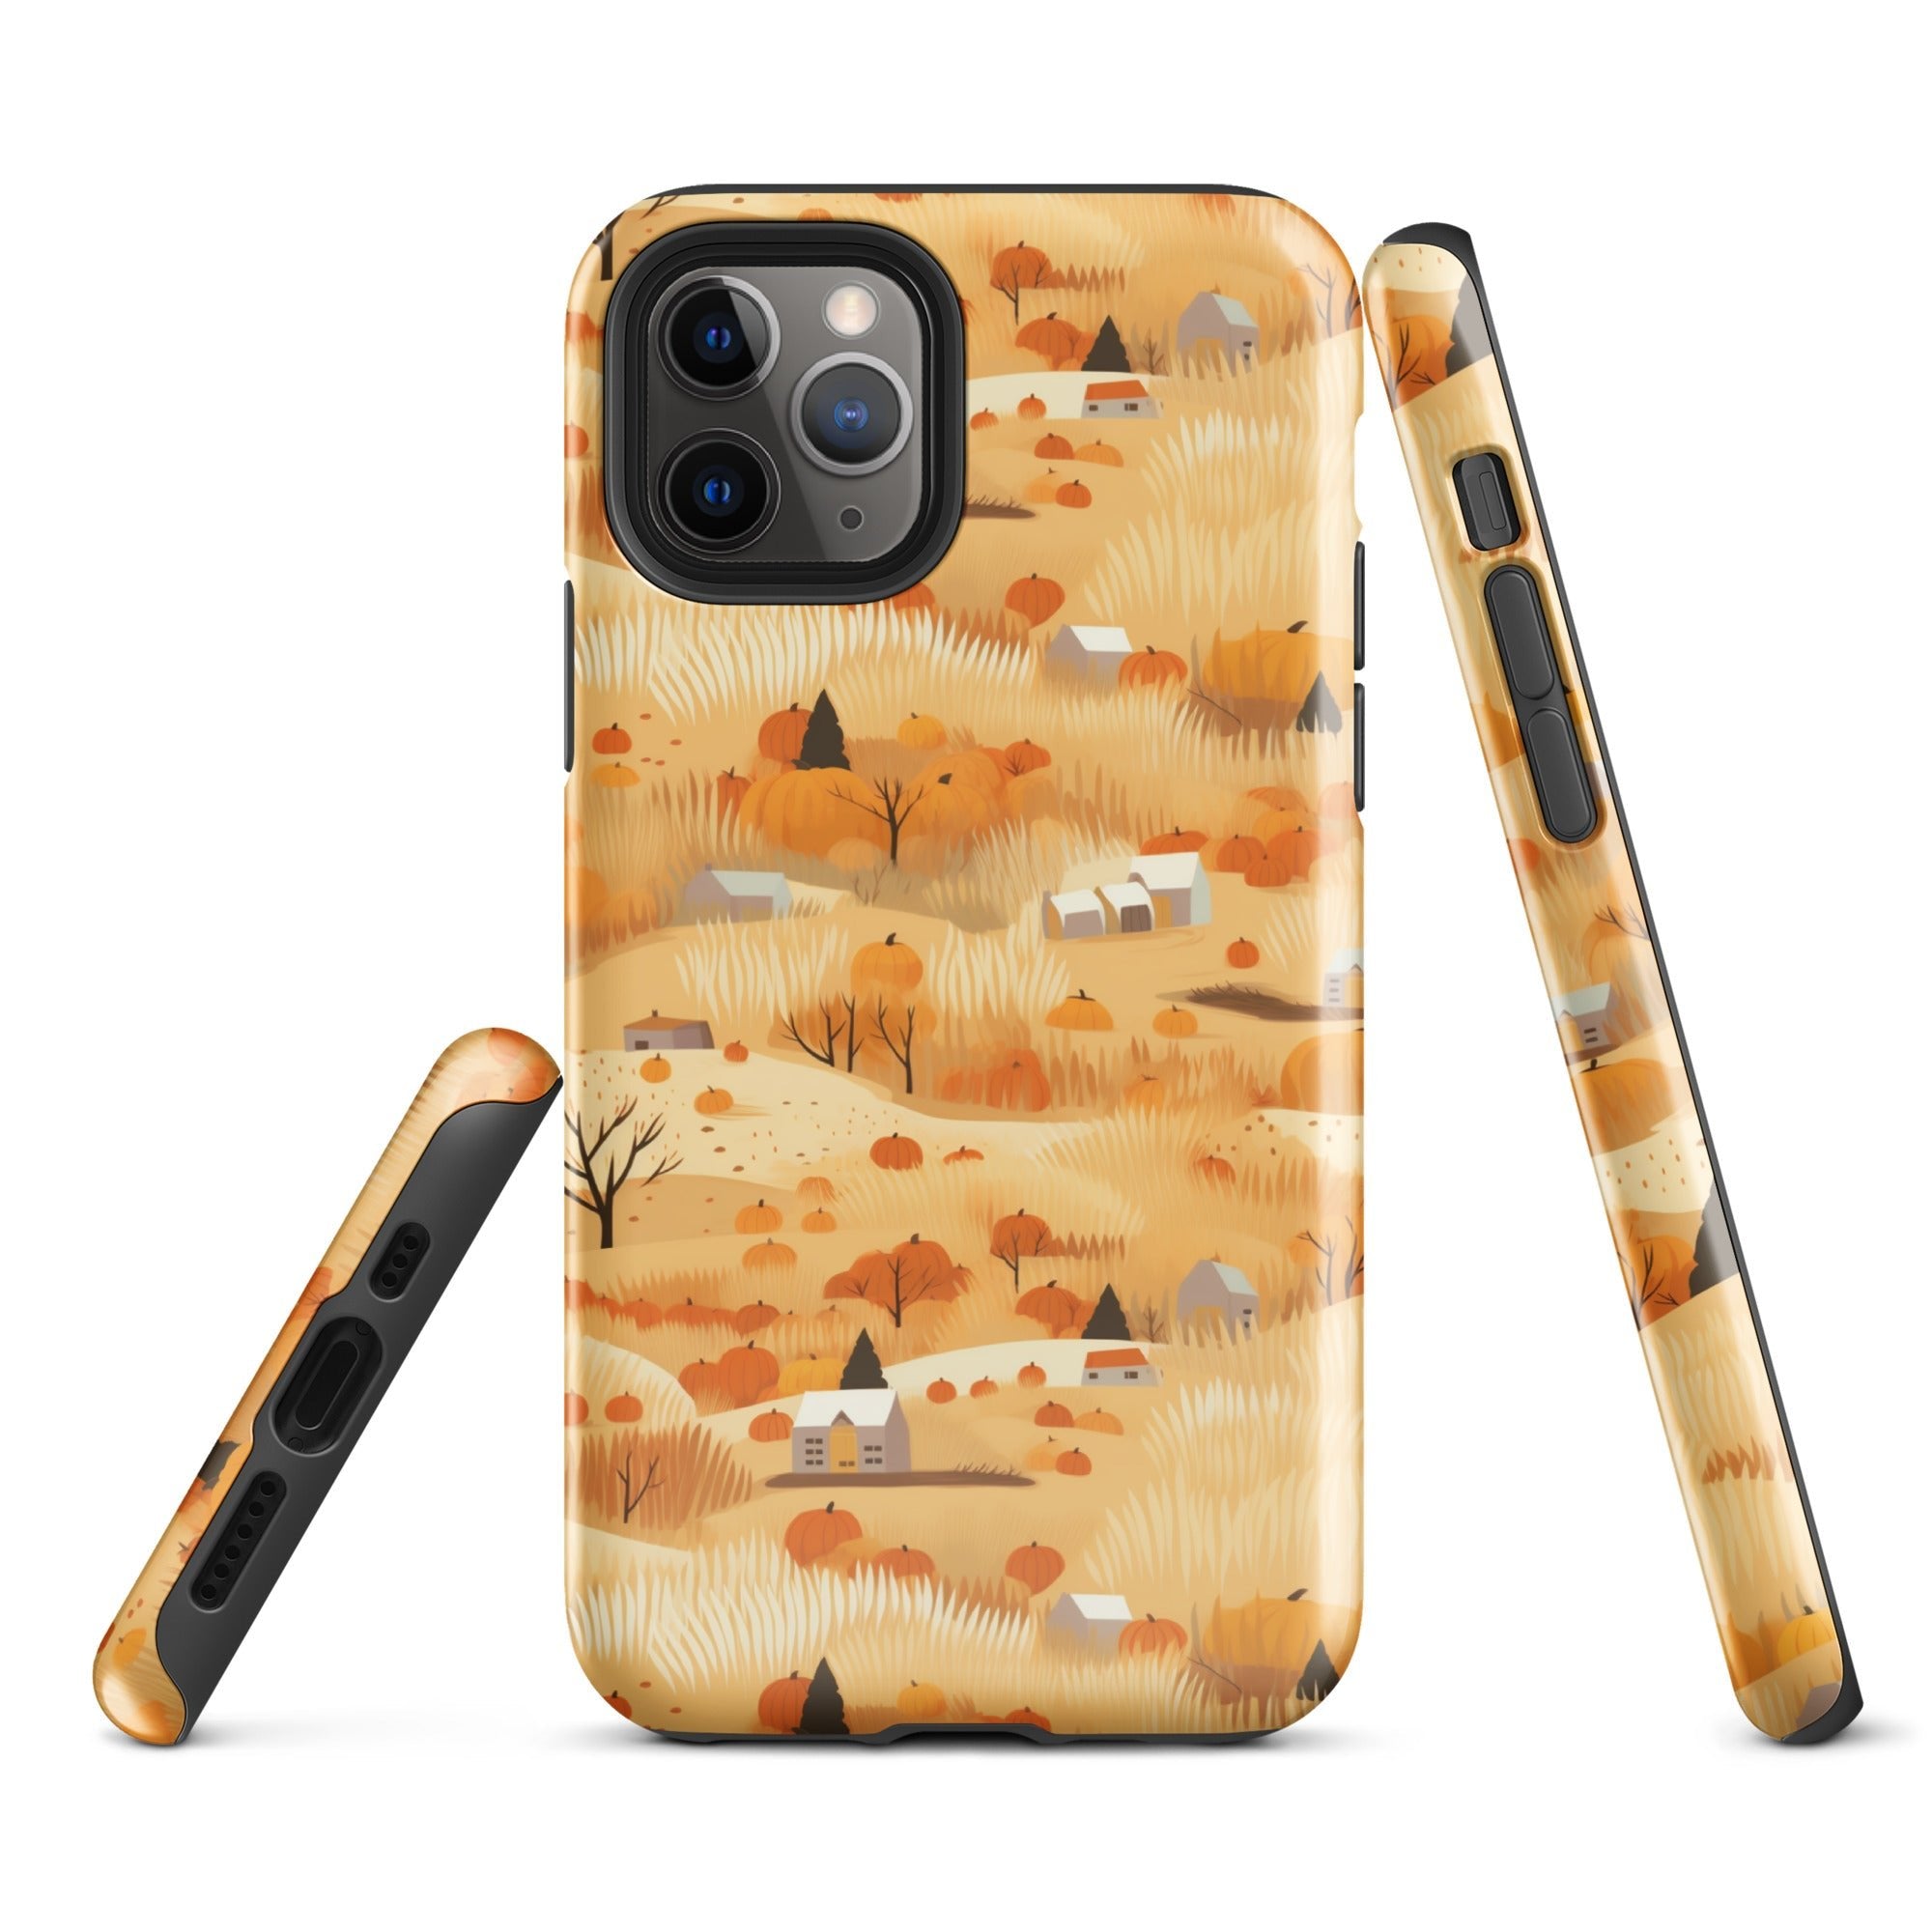 Harvest Homestead - Whimsical Autumn Villages - iPhone Case - Pattern Symphony